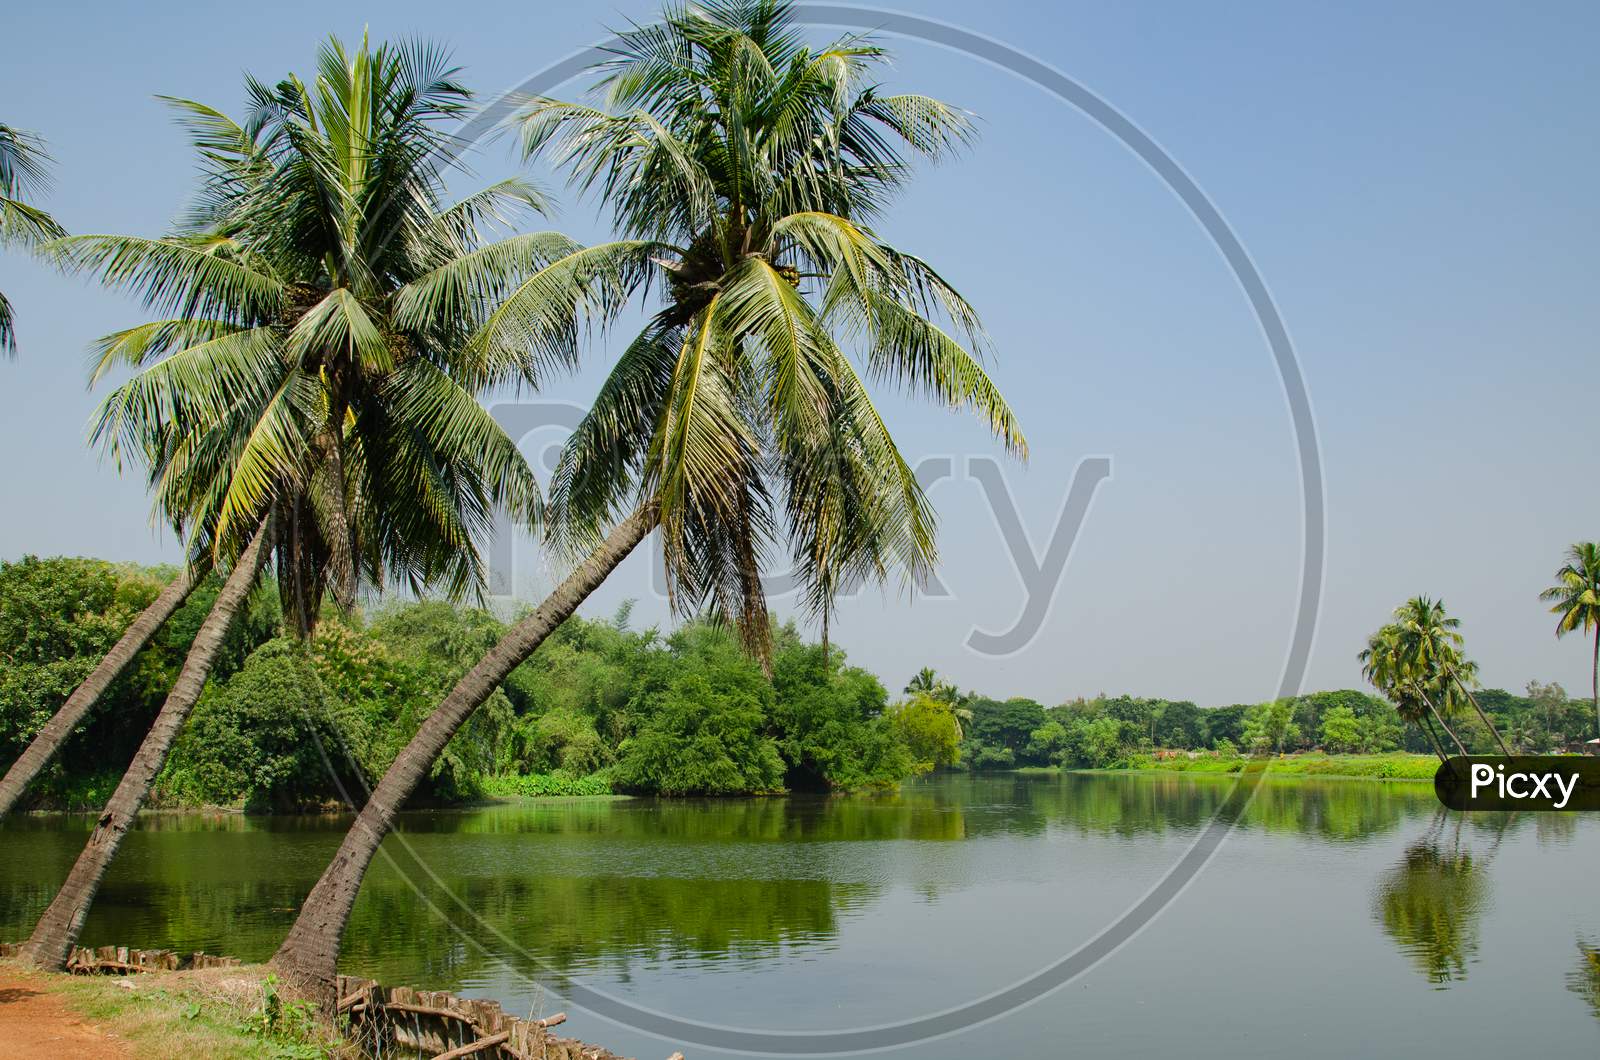 Village scenery with palm trees bending over a pond.